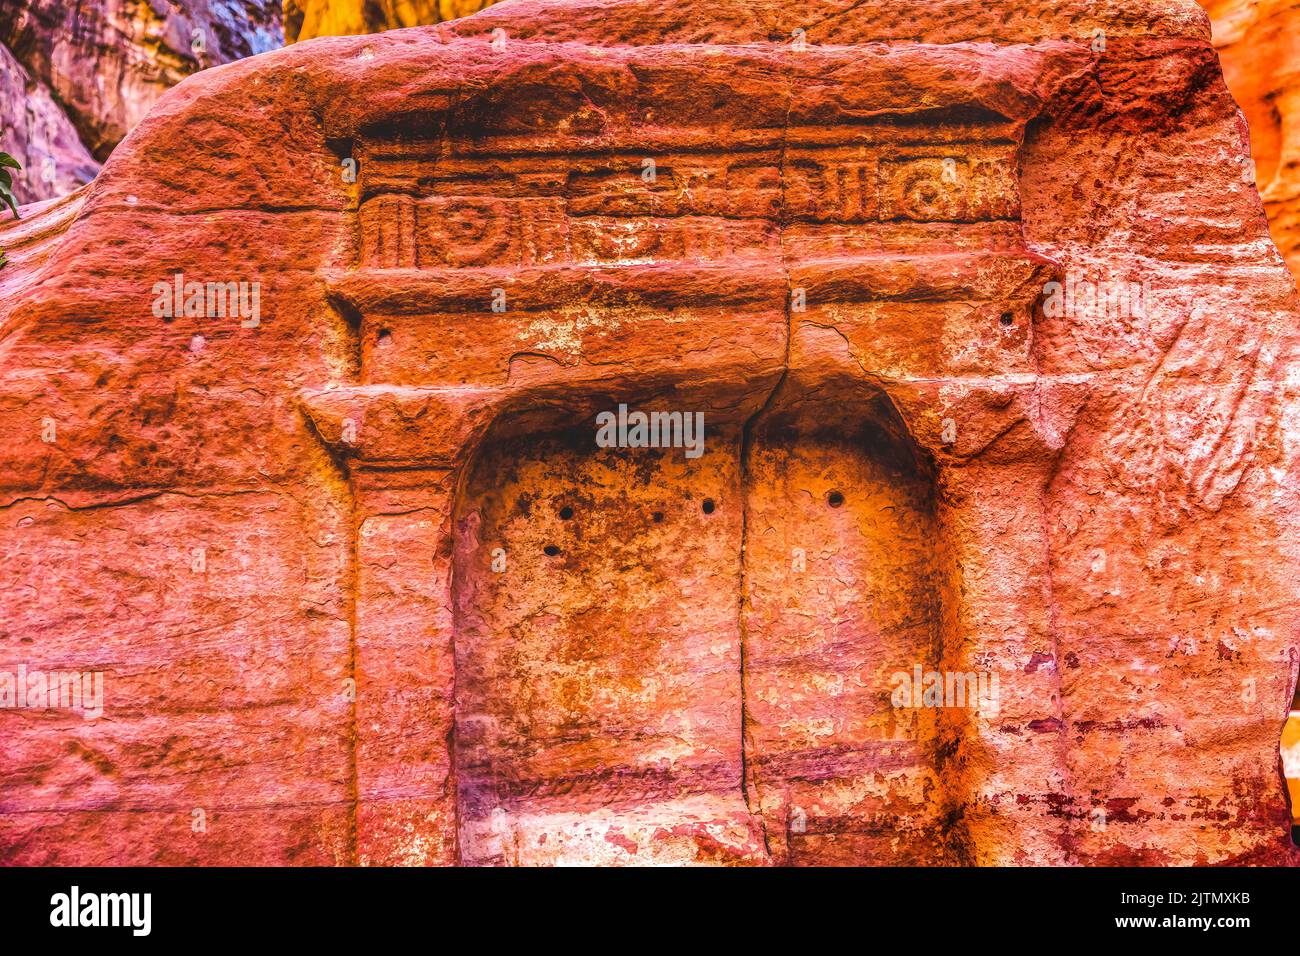 Tomb Outer Siq Canyon Petra Jordan Petra Jordan.  Colorful Yellow Pink Canyon becomes rose red when sun goes.  The rose red can become blood red.  Red Stock Photo